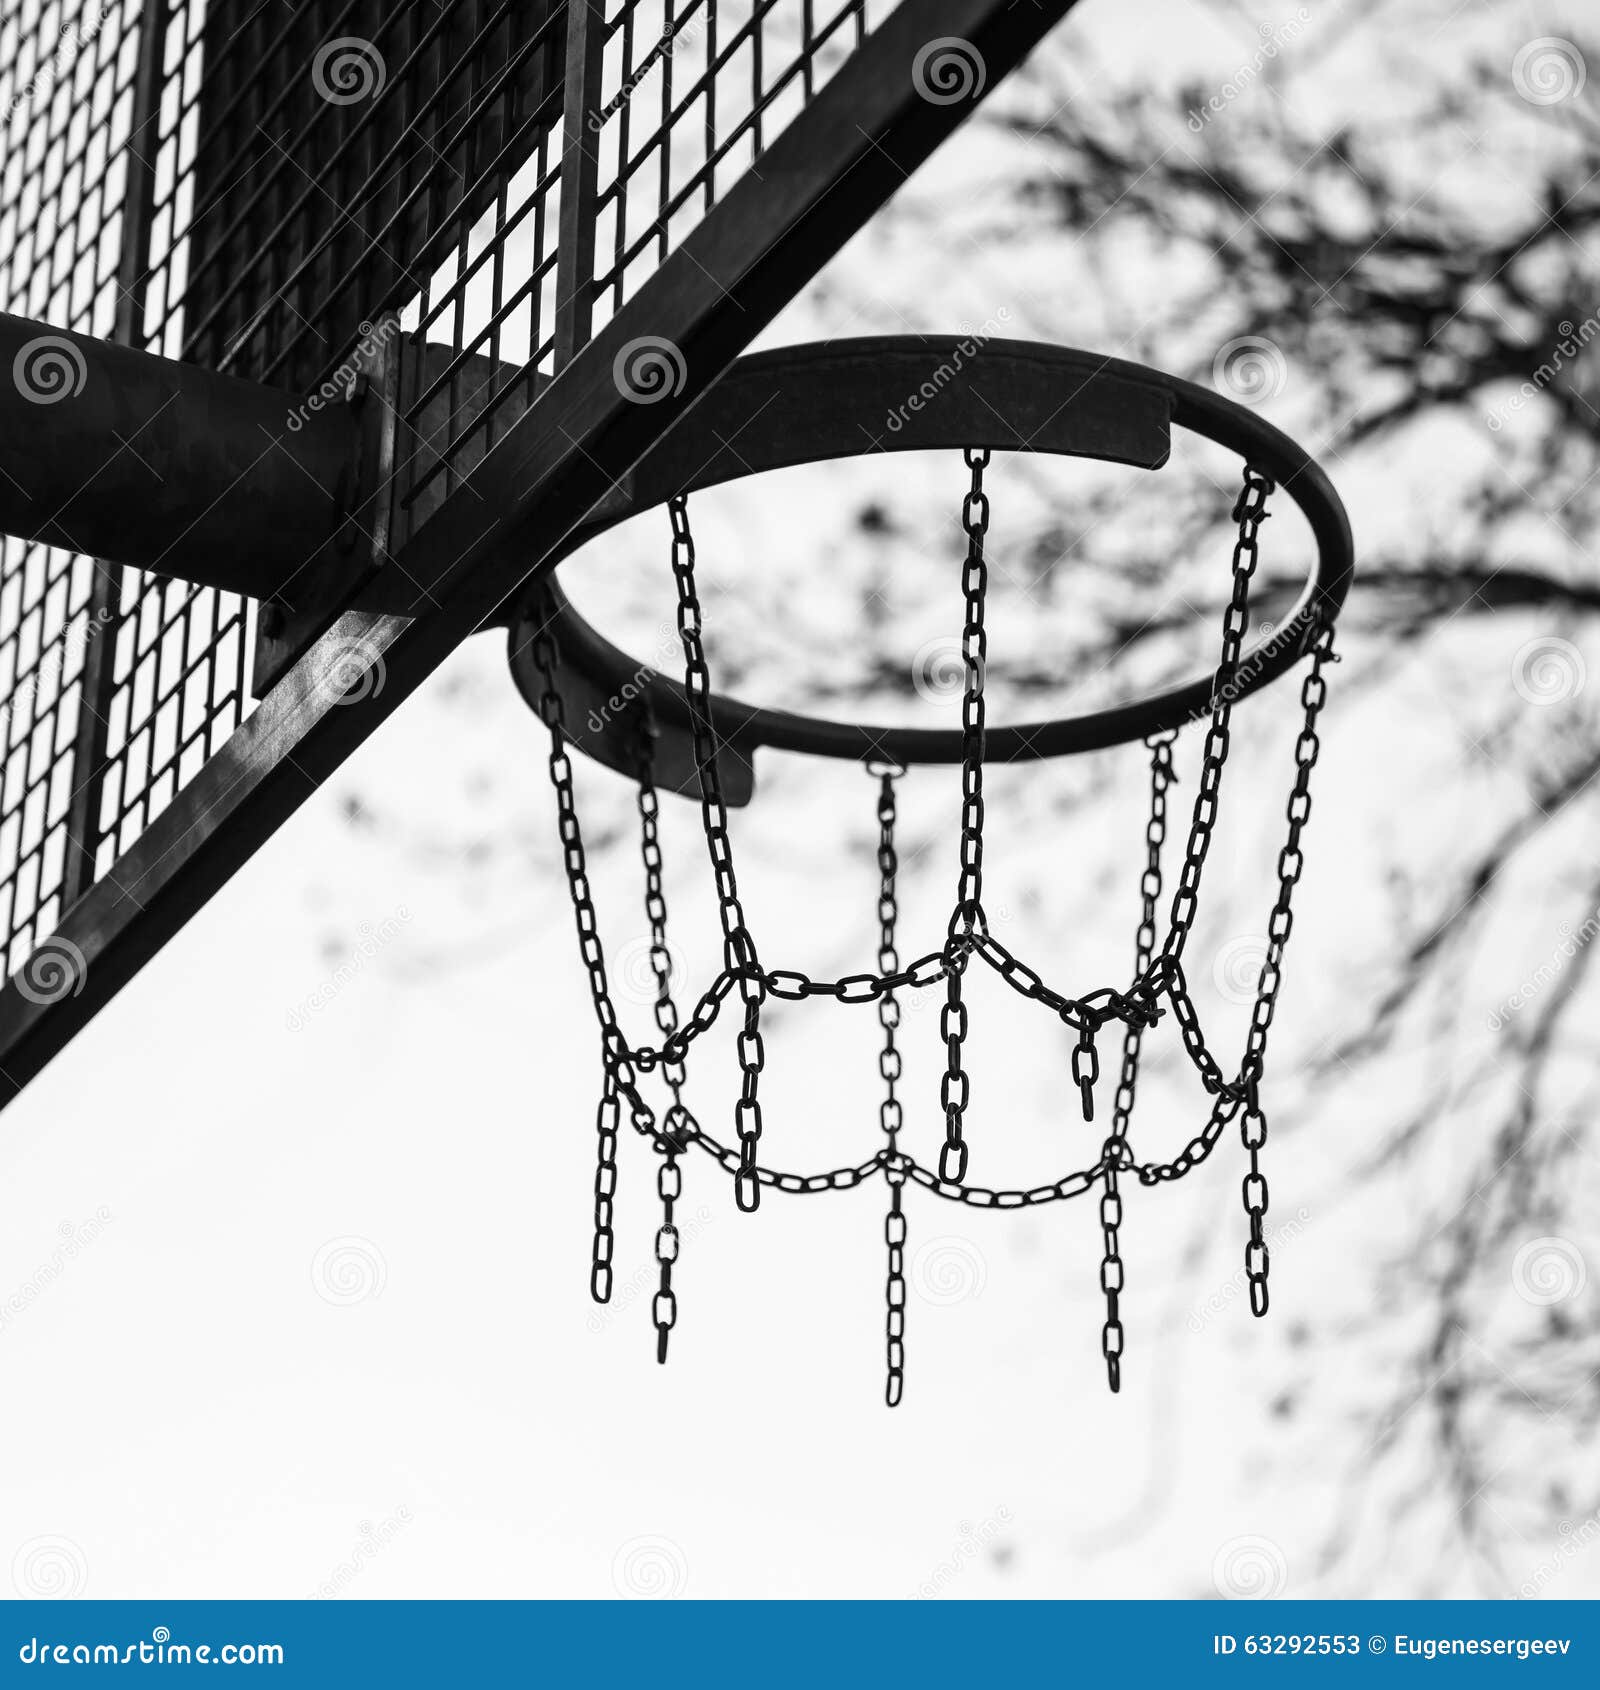 Basket Made of Chains for Basketball Playing Stock Image - Image of ...